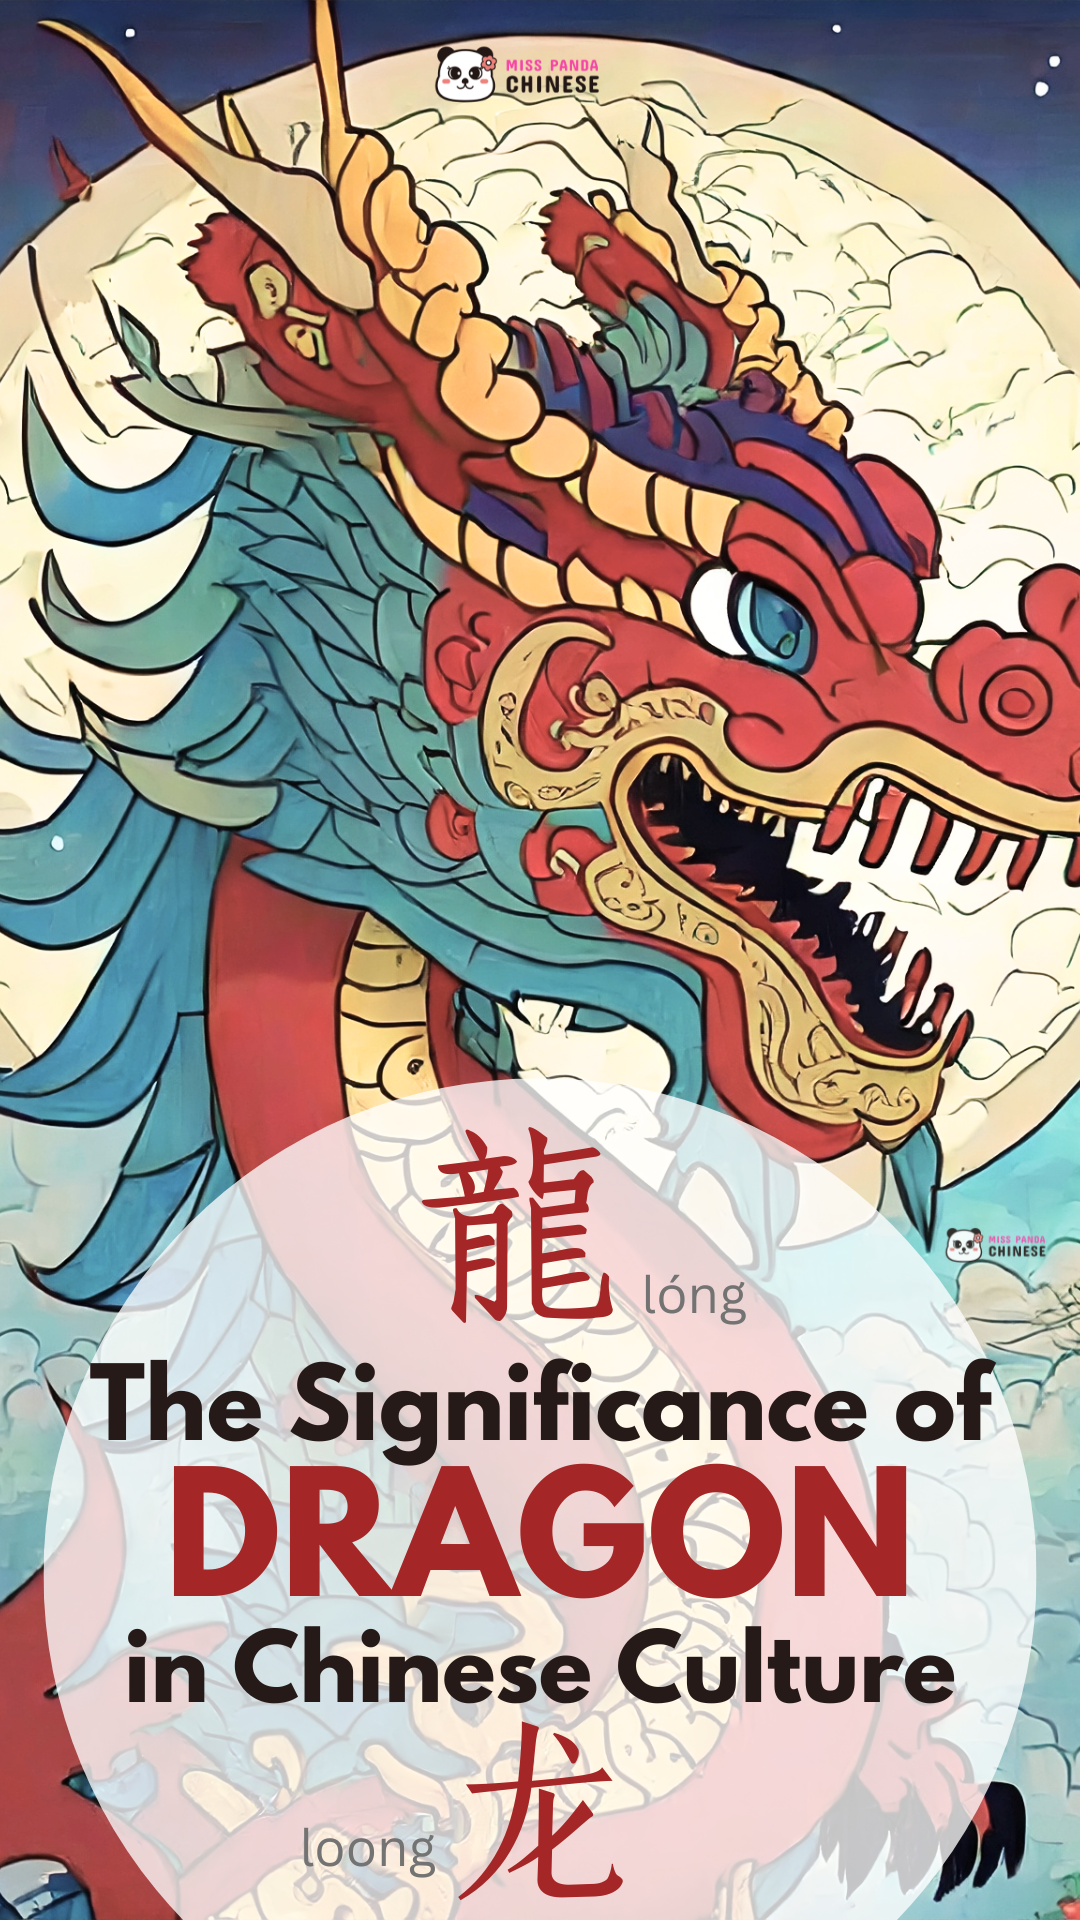 The Significance of Dragon in Chinese Culture | Miss Panda Chinese | MissPandaChinese.com